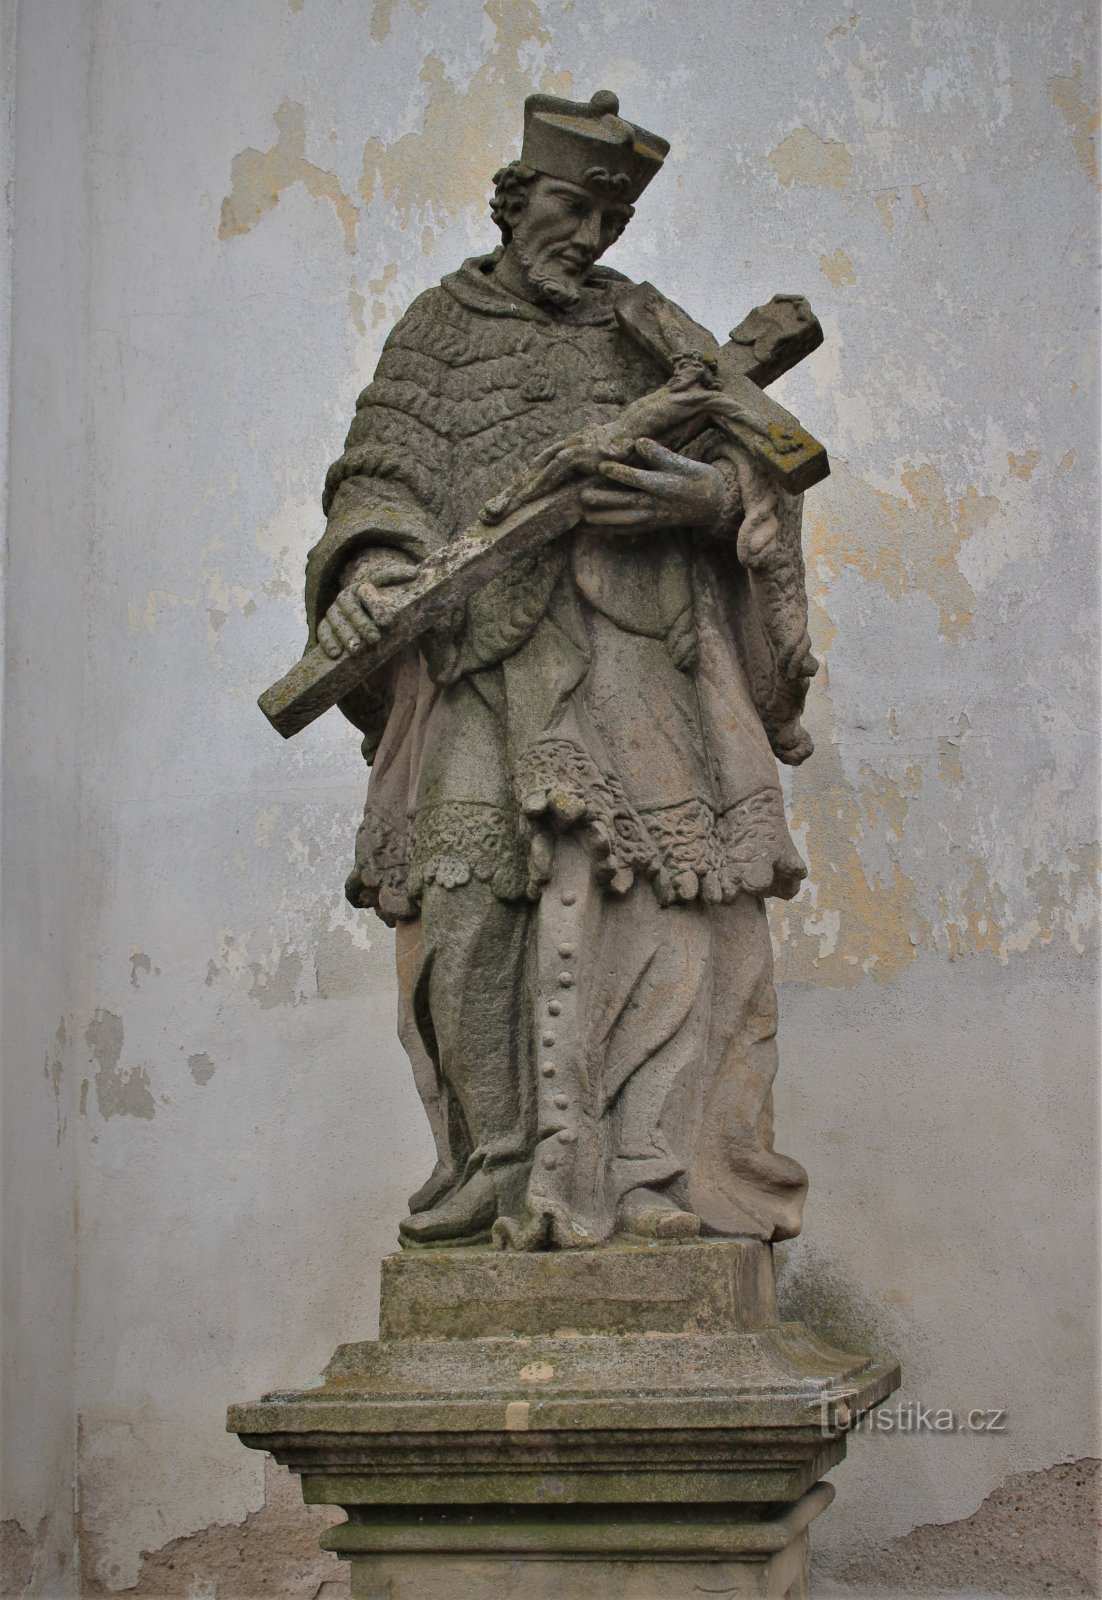 Statue of St. John of Nepomuck in front of the church